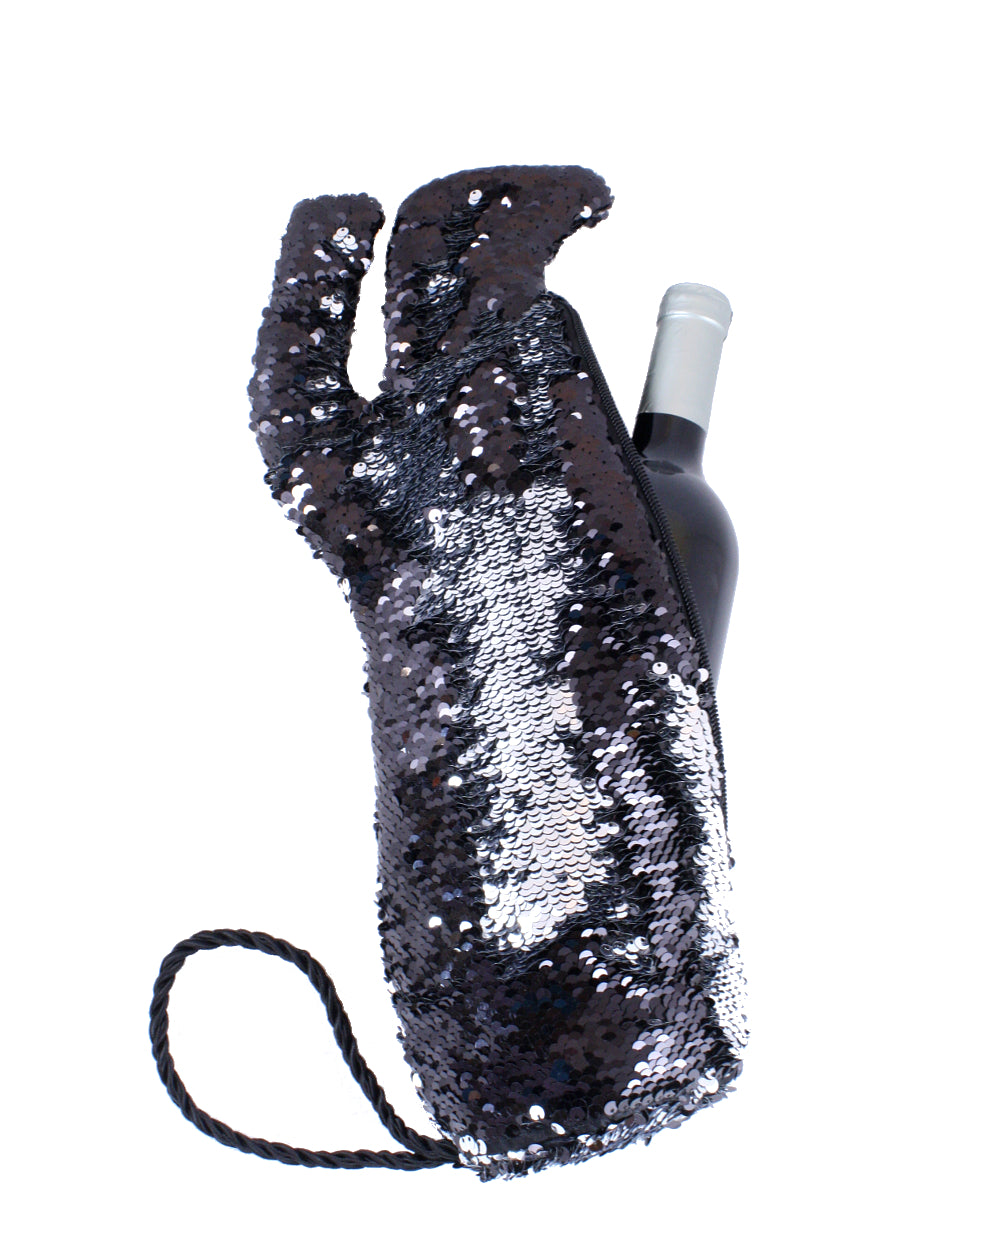 Stiletto Wine Bag in Black and Silver Reversible Mermaid Sequin Fabric